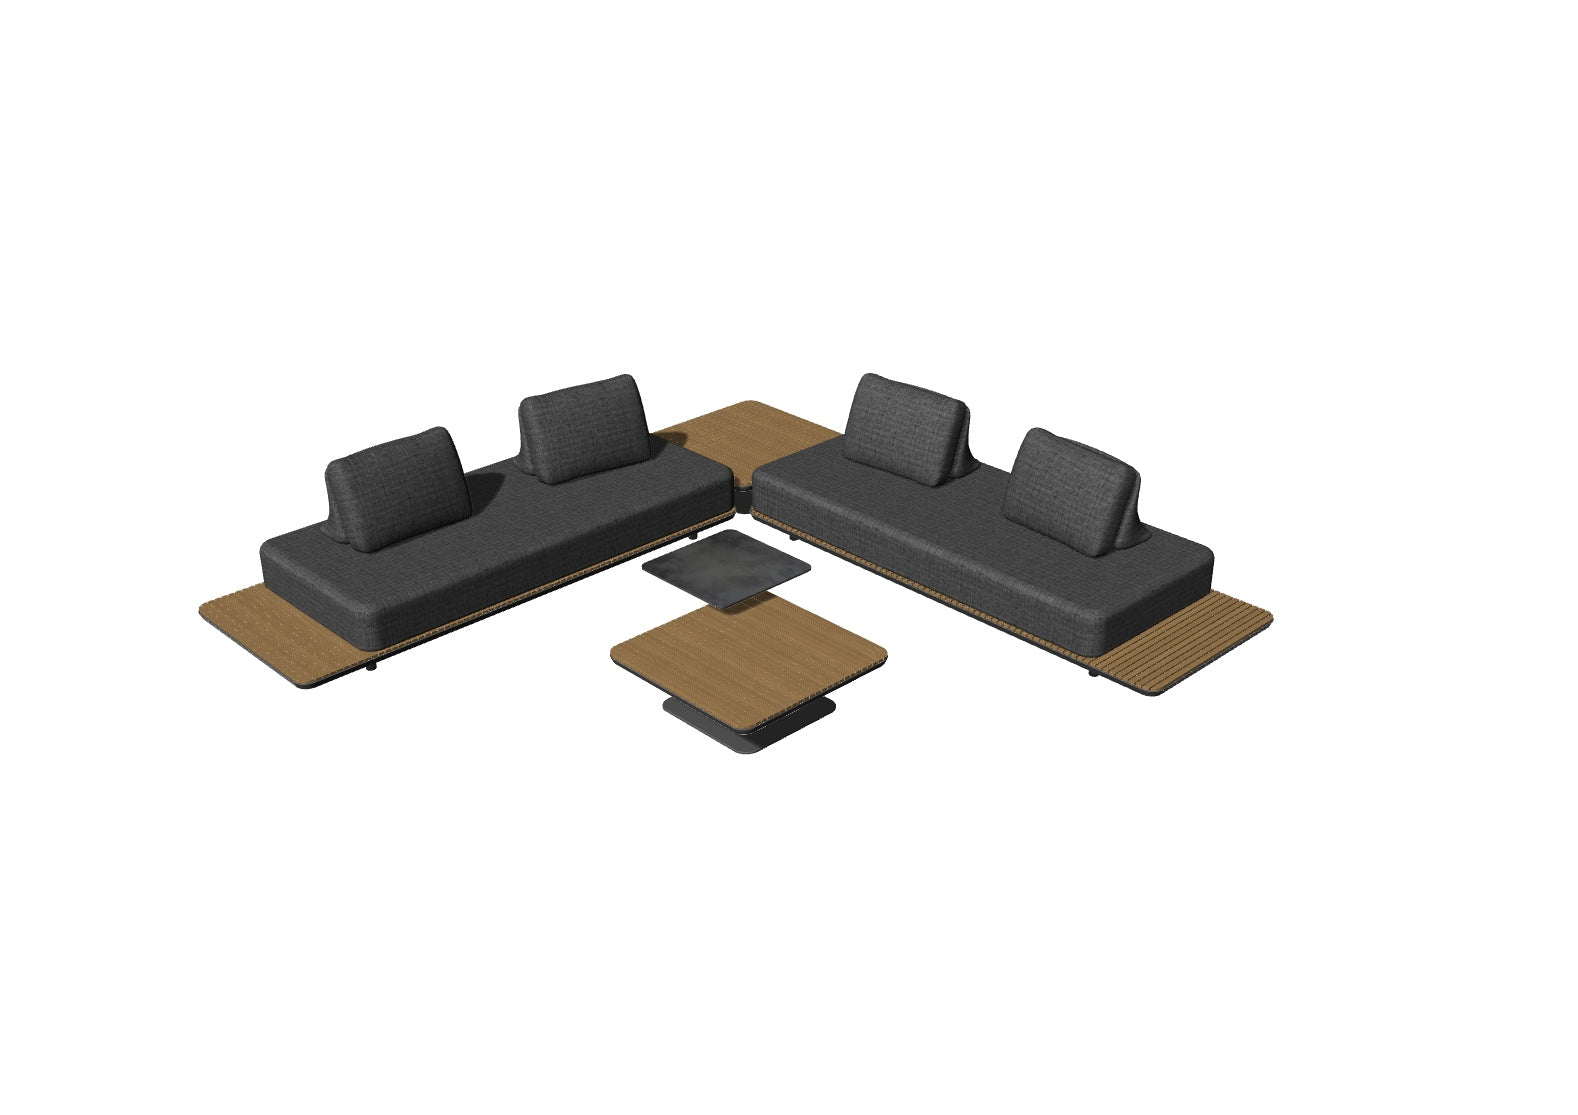 A391E New Freedom Sectional Set (2) 99"x 37"x 12" Powder Coated Aluminum + Pillow Dark Charcoal